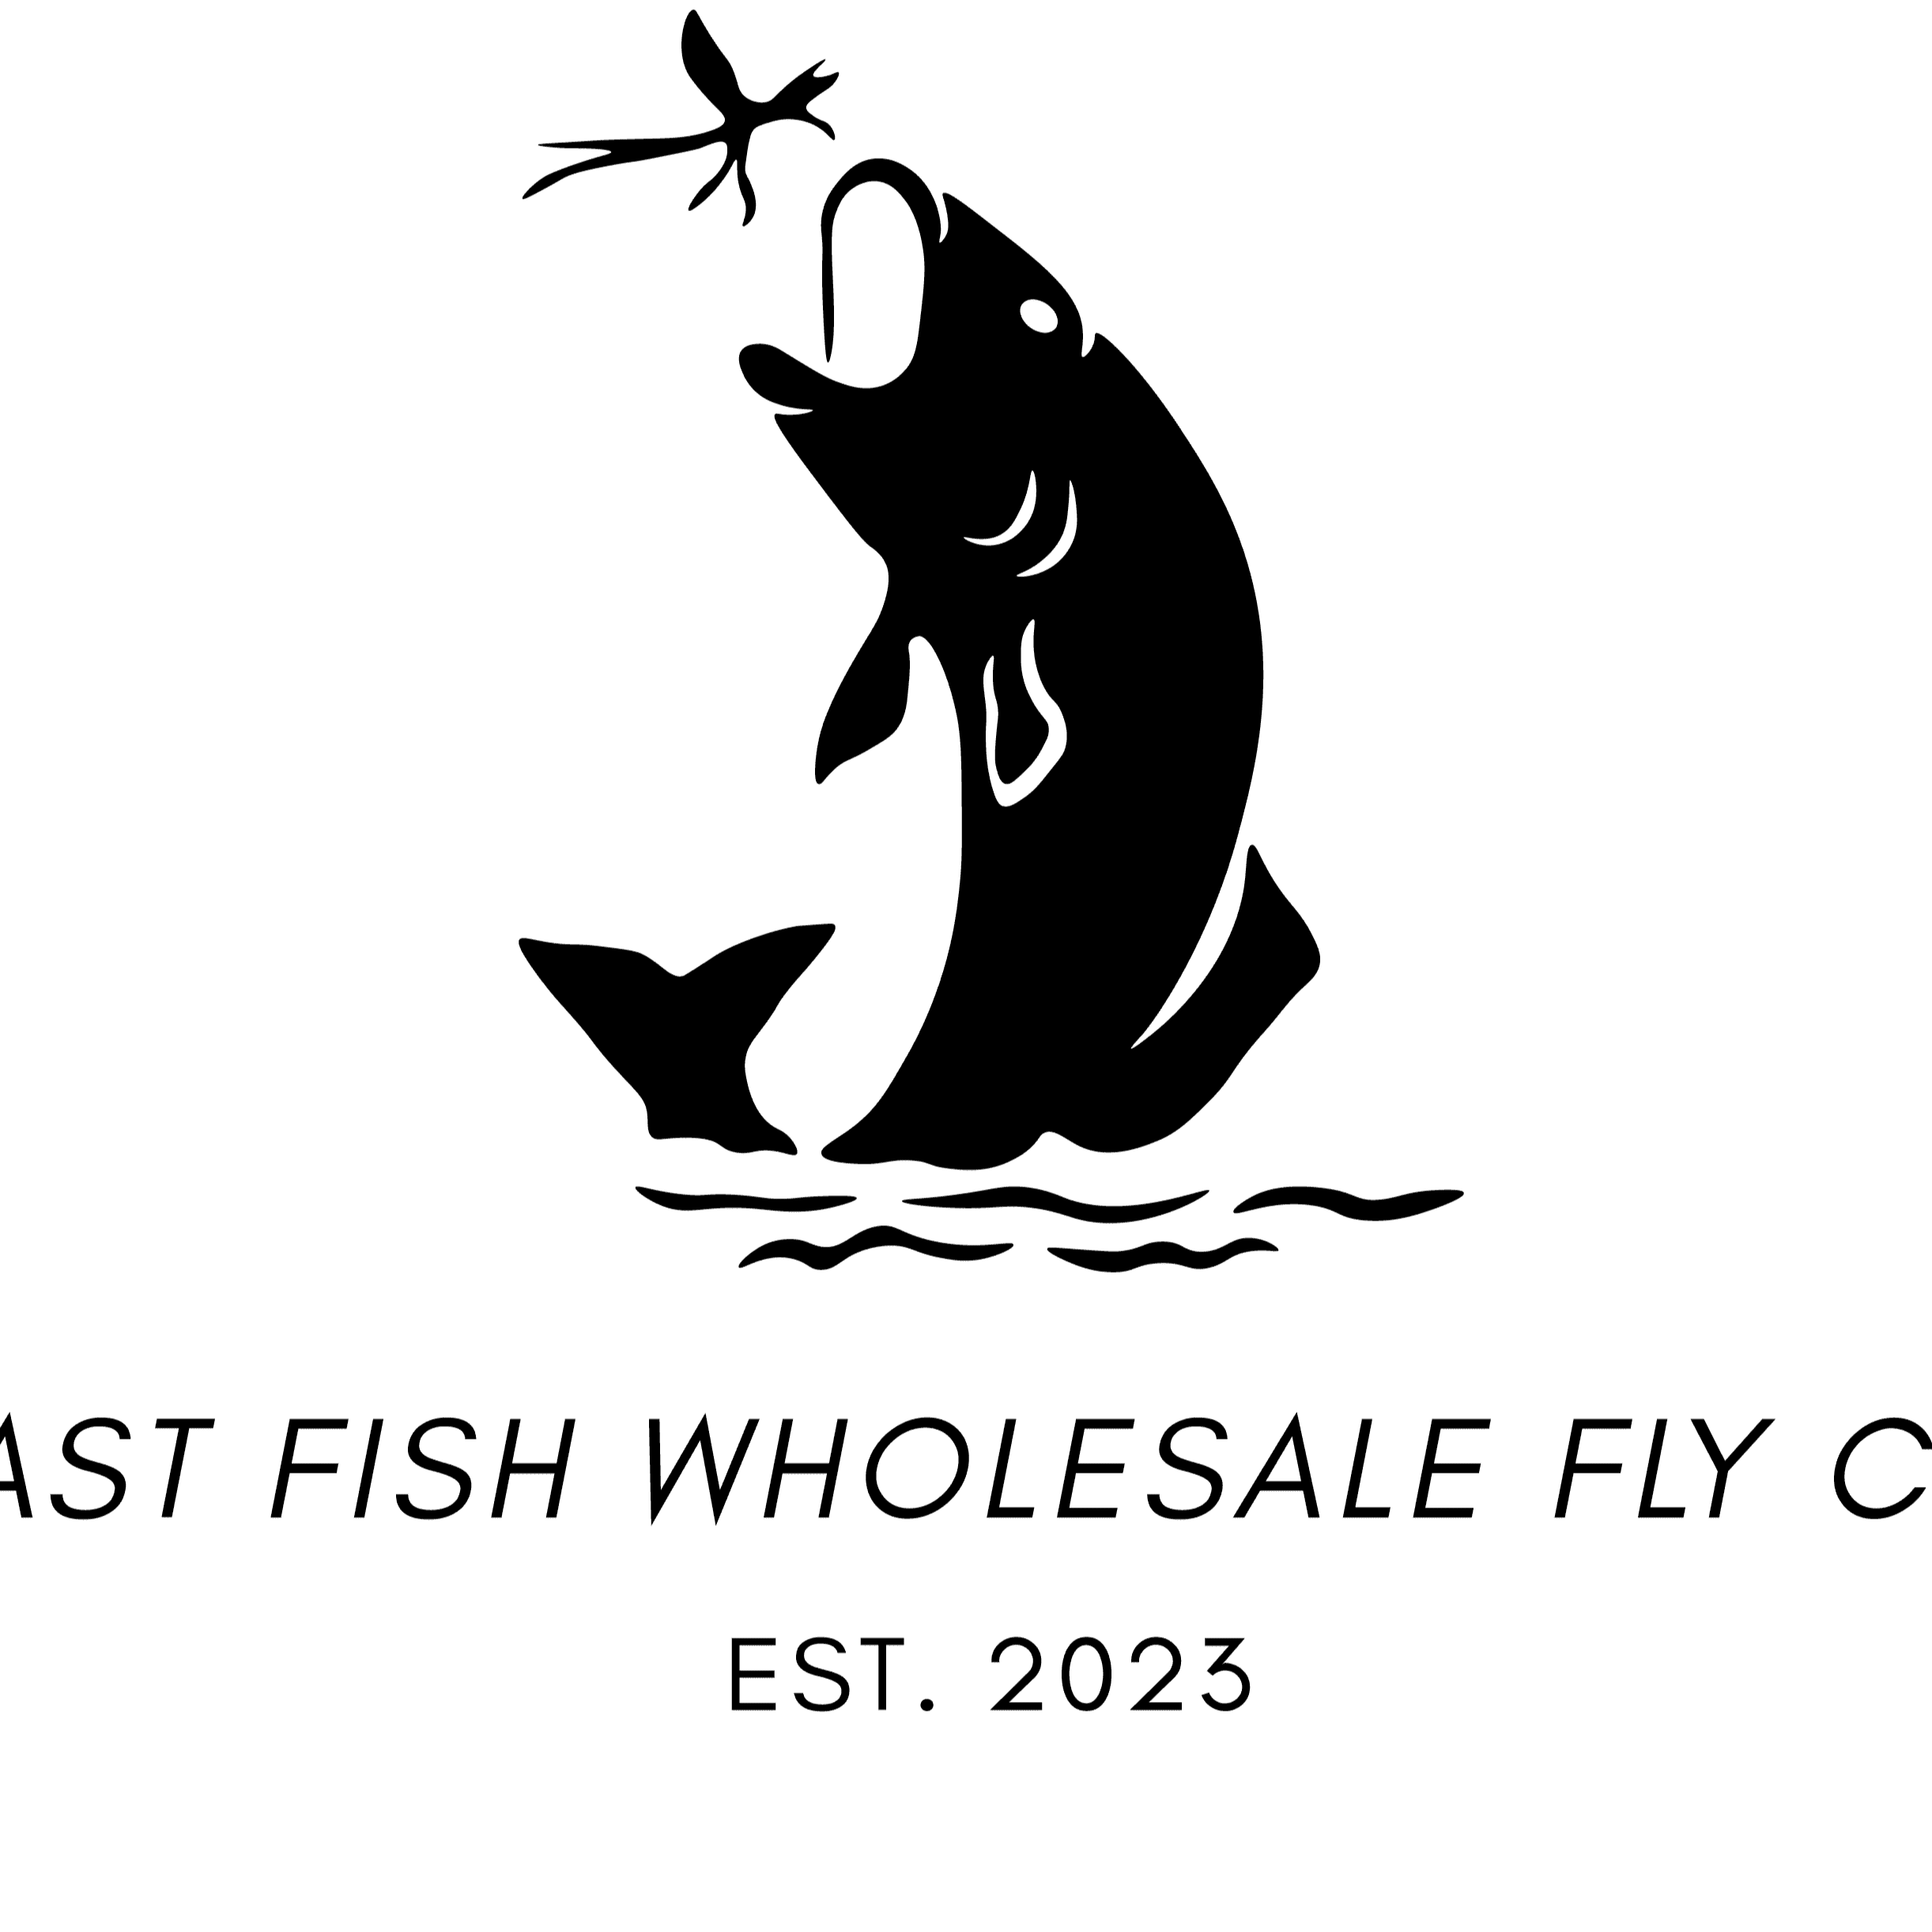 Fast Fish Wholesale Fly Company